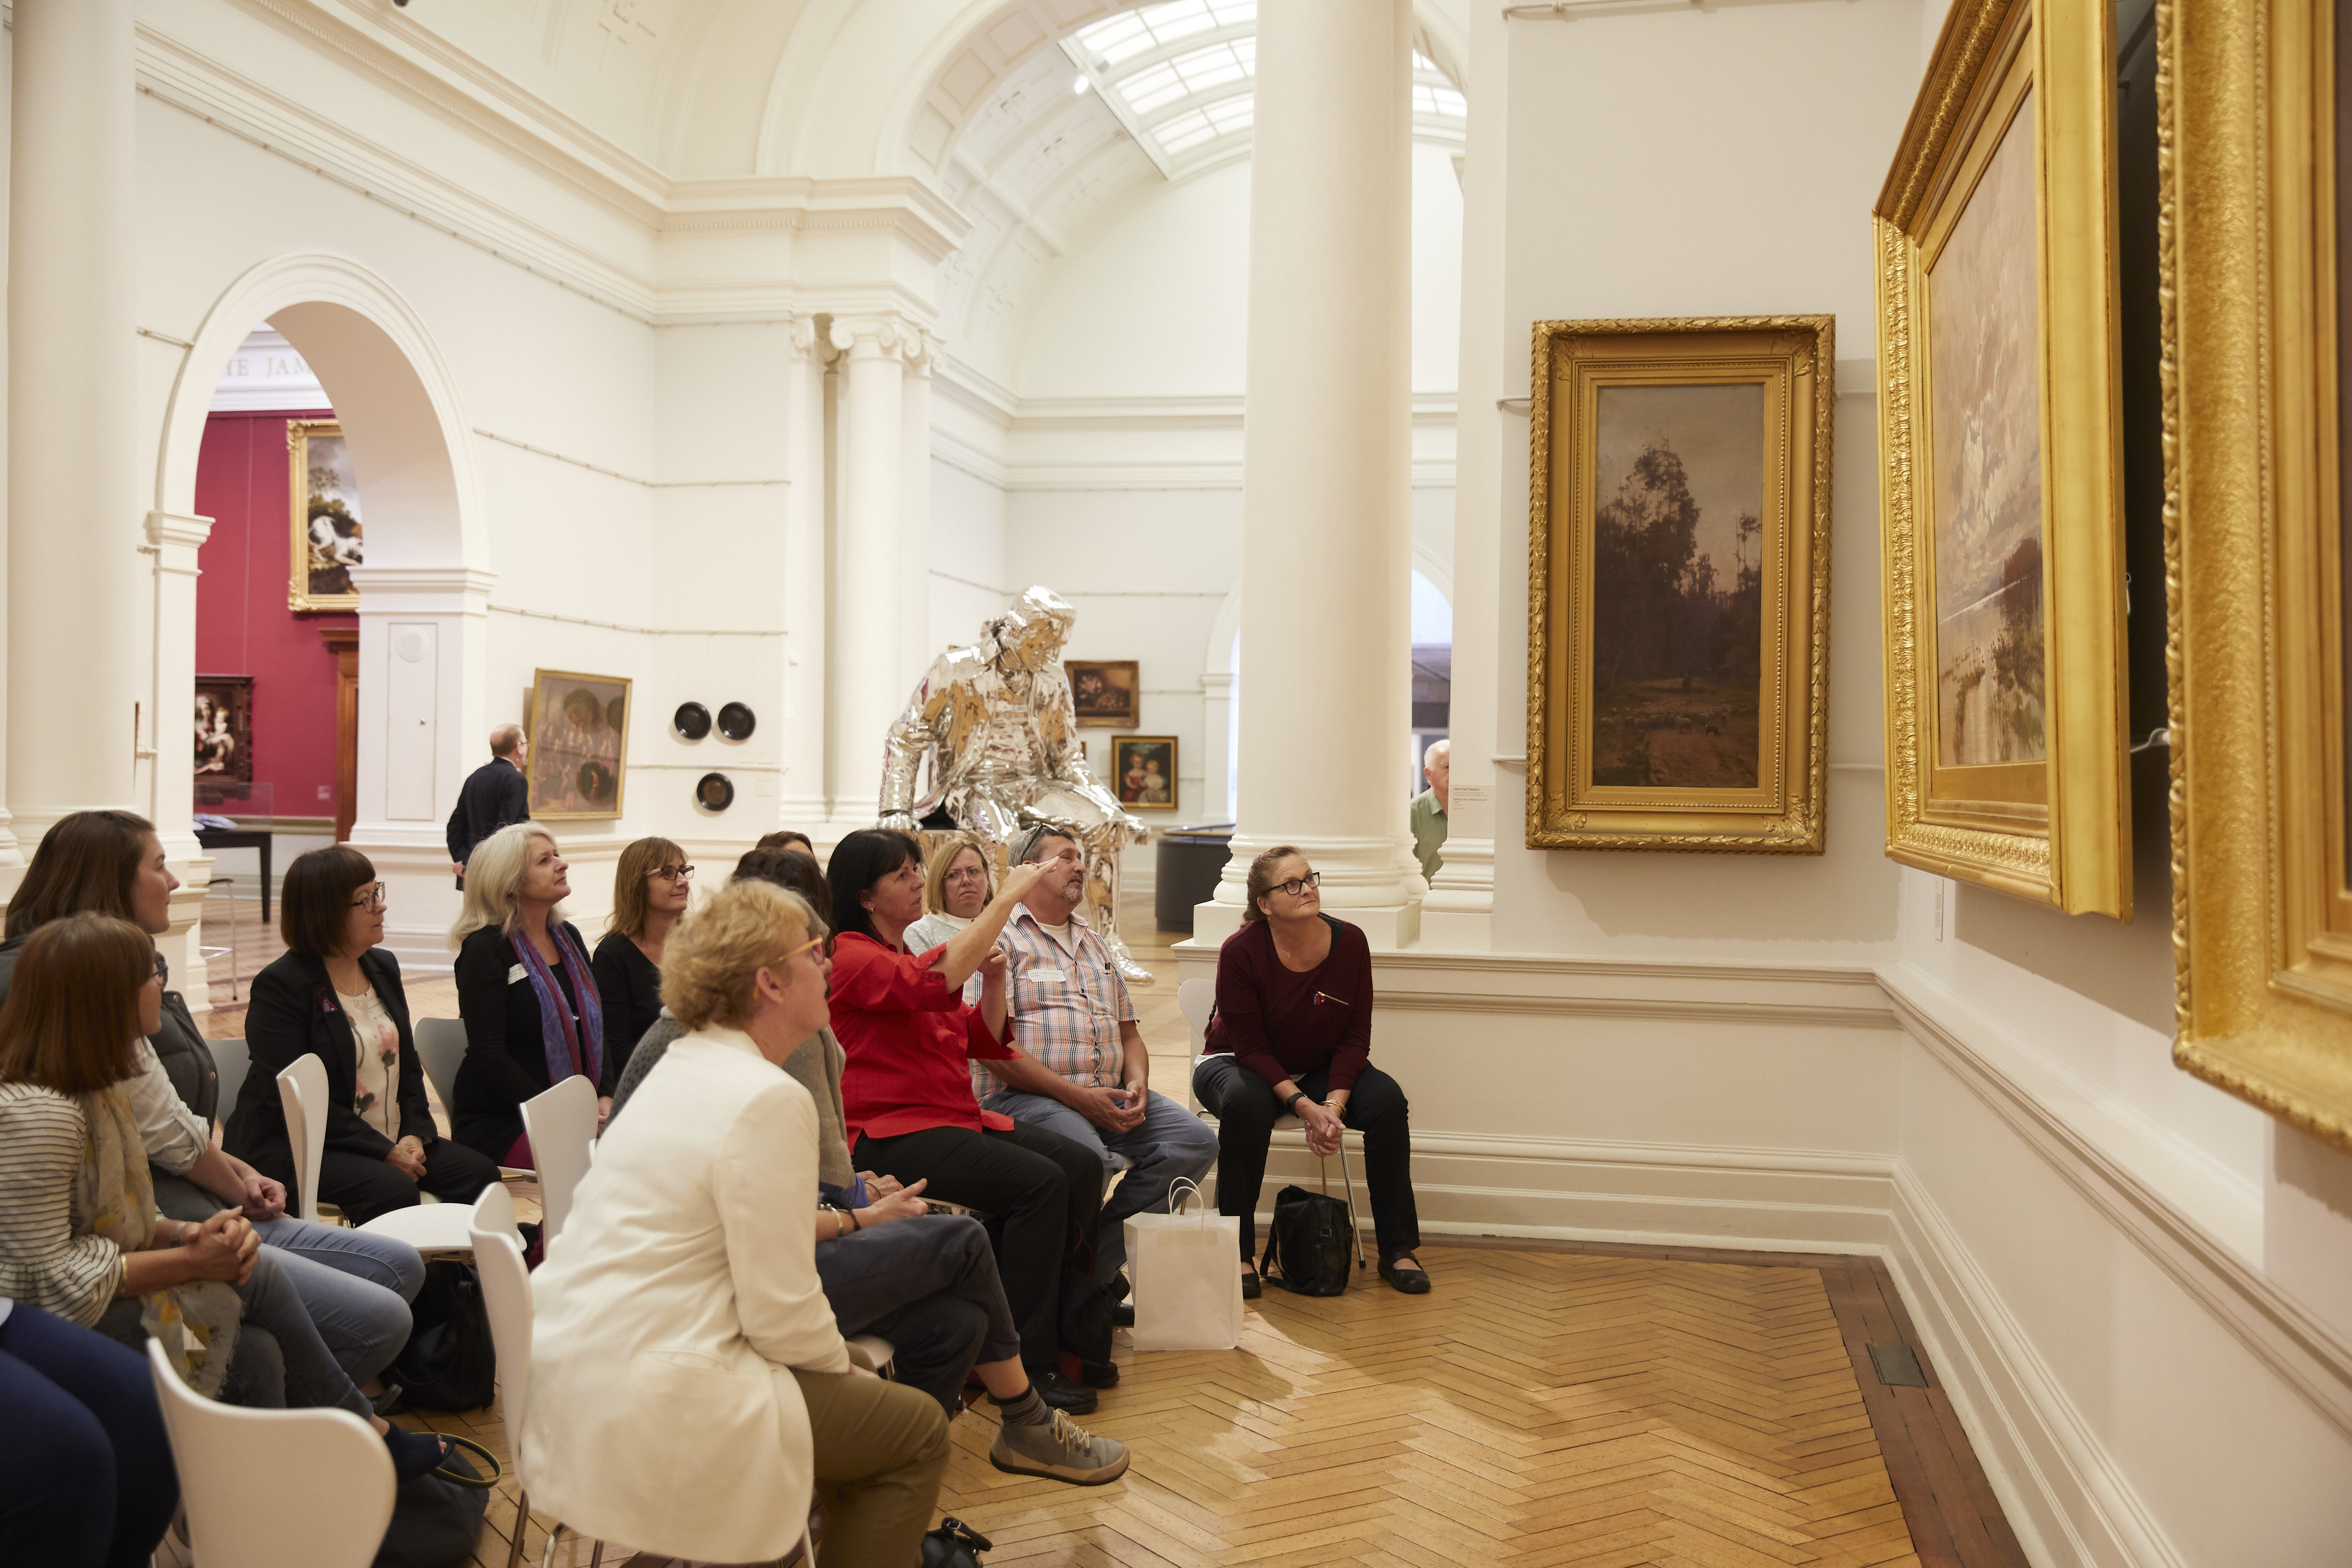 Pause program exploring What matters most in the Australian Galleries of the Art Gallery of New South Wales, 2019